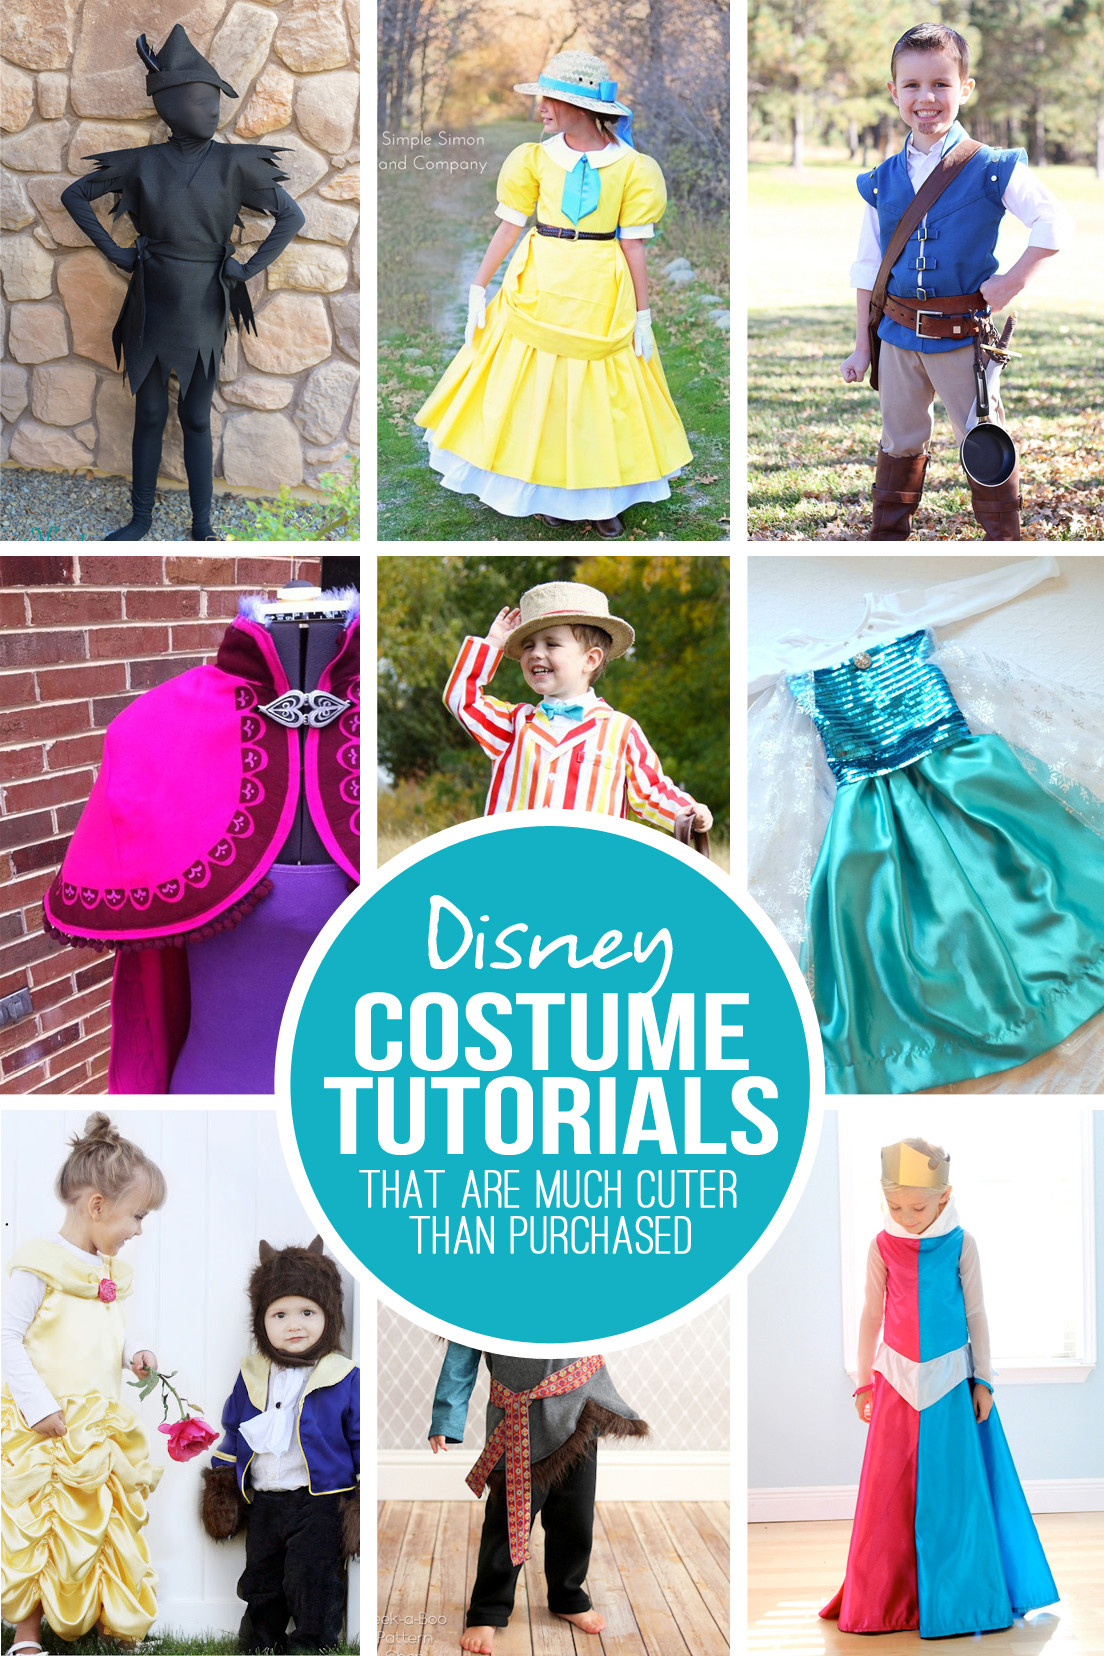 DIY Disney Character Costume
 28 DIY Disney Costume Tutorials at are MUCH cuter than